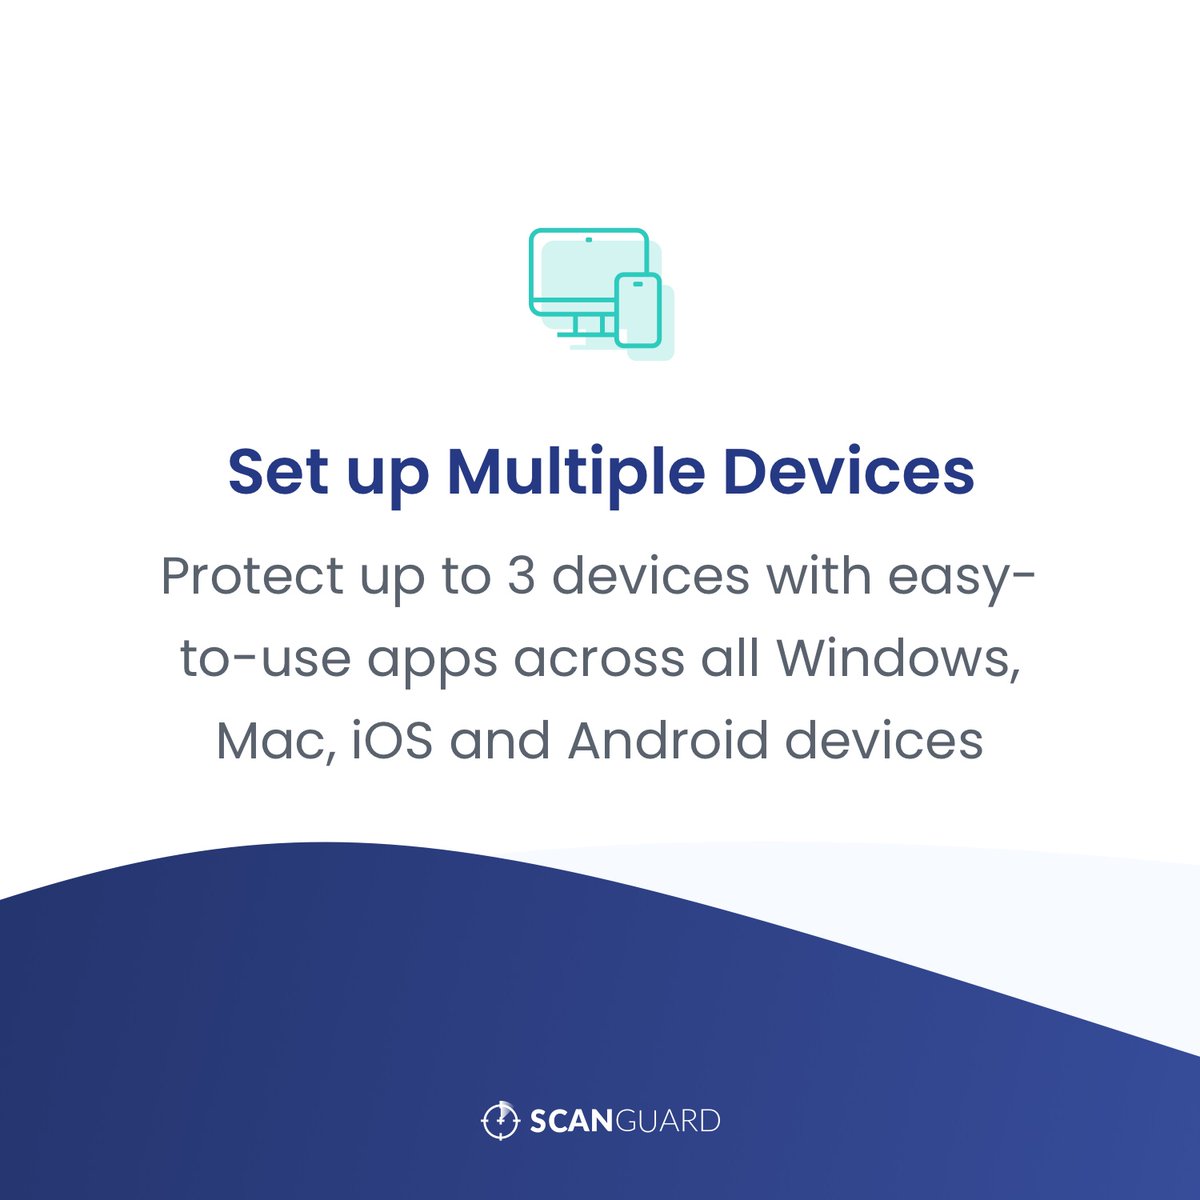 At Scanguard we aim to make security simple. By creating one account, you can login to that account across multiple devices for protection.
#MultiDeviceProtection #antivirus #app